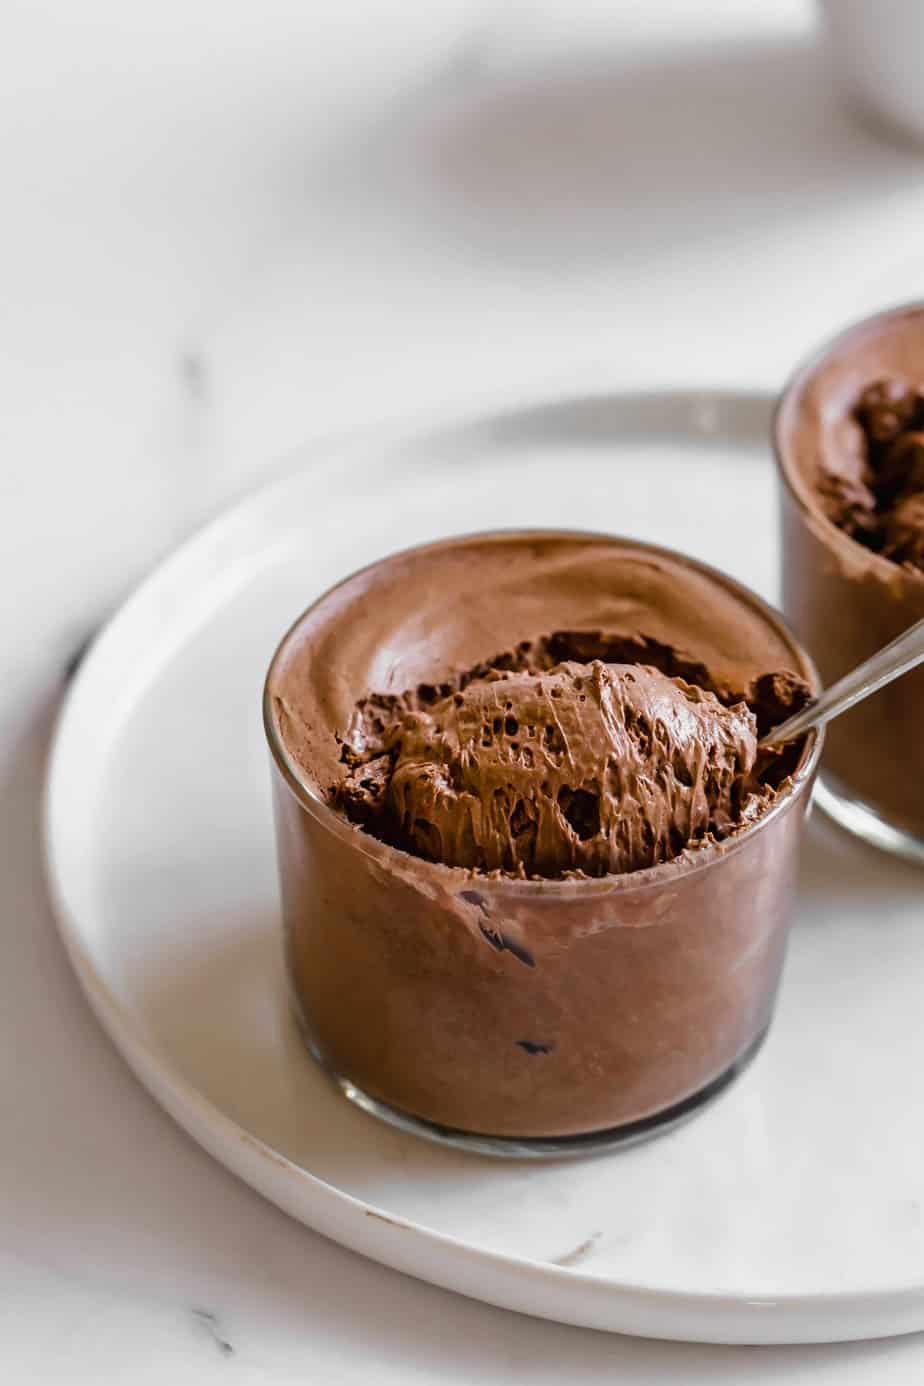 The Creamiest Chocolate Mousse with a spoon digging in.